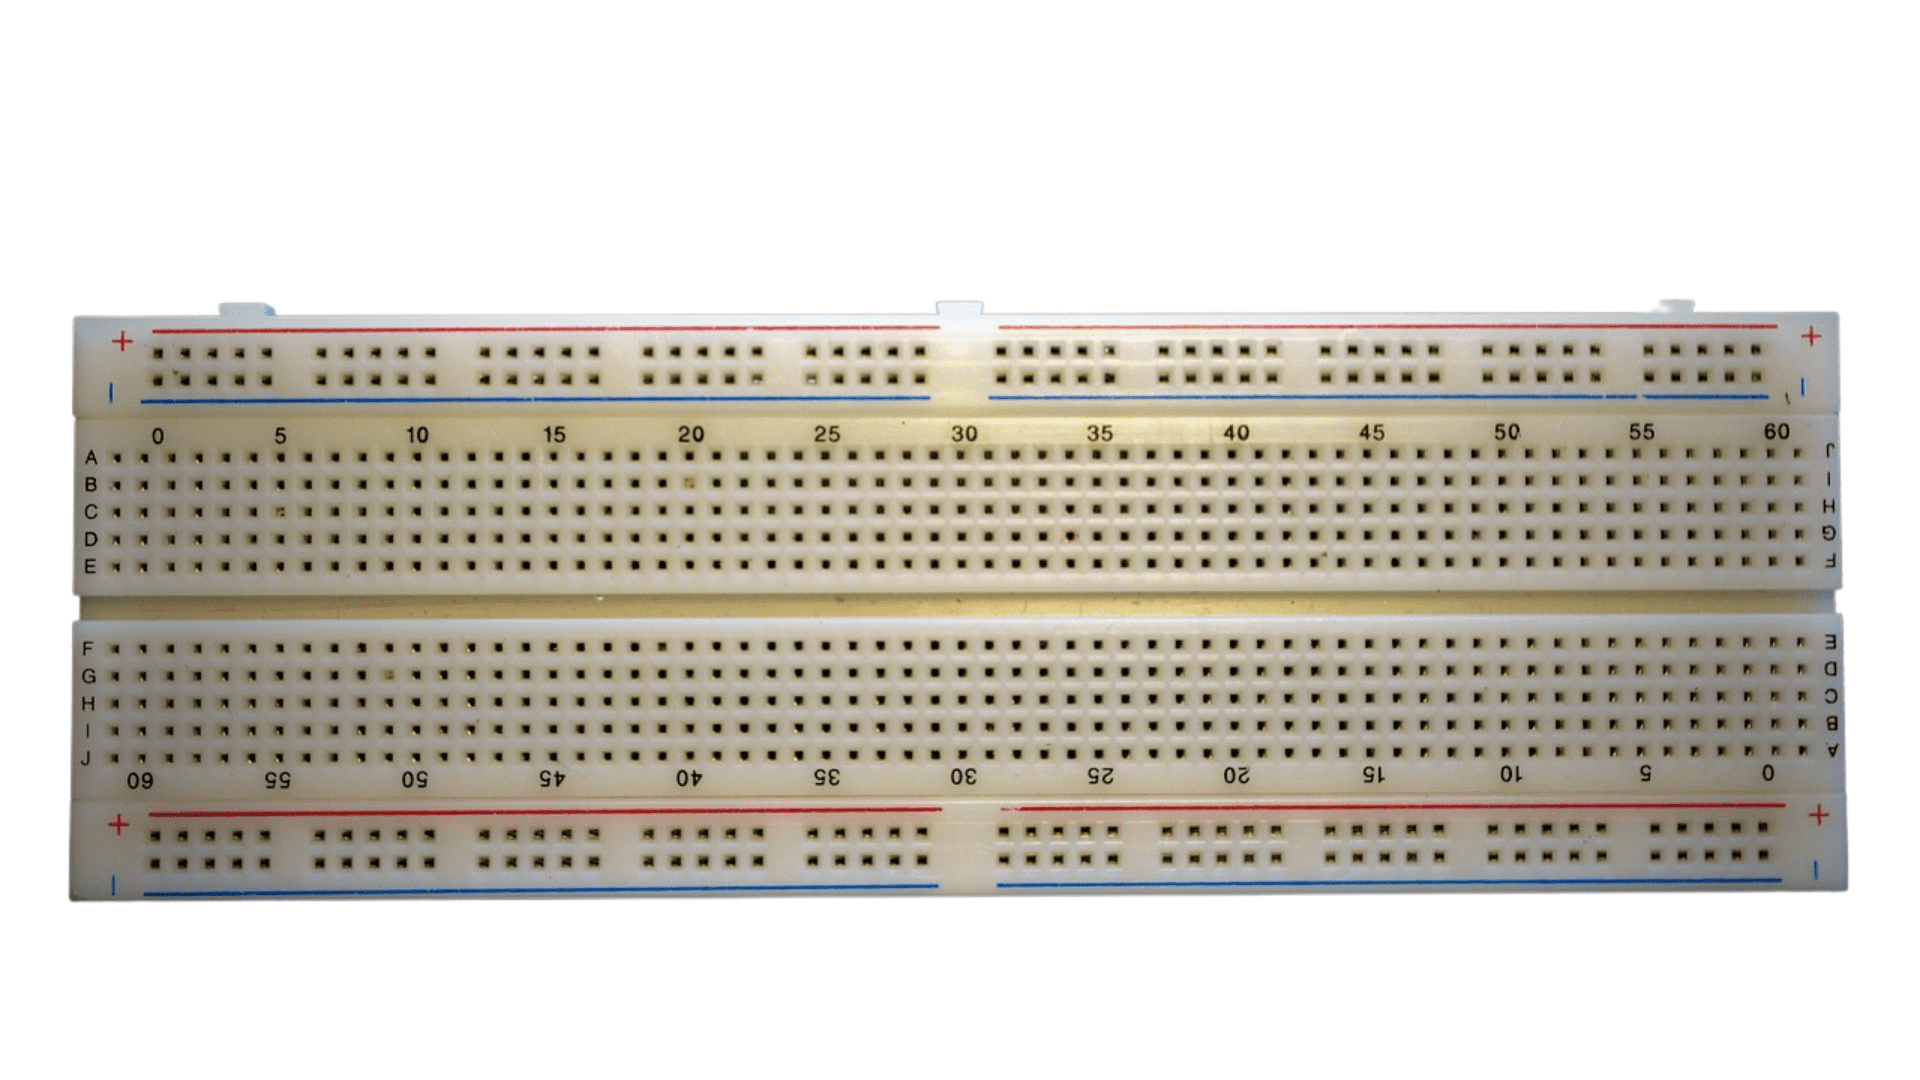 The breadboard build electronic circuits